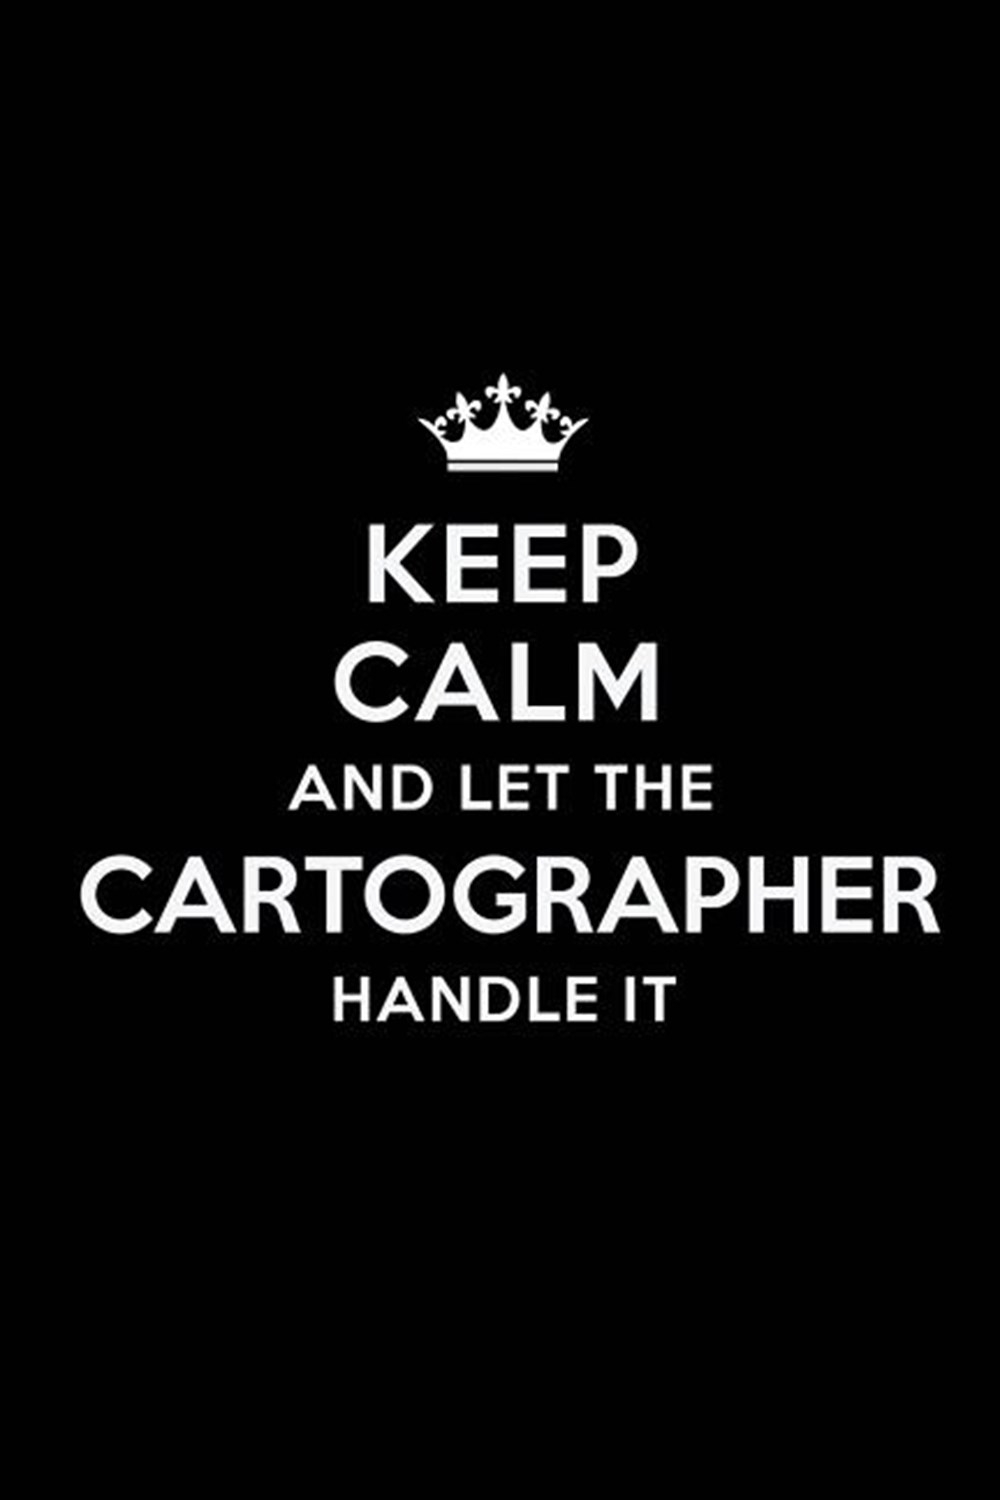 Keep Calm and Let the Cartographer Handle It Blank Lined Cartographer Journal Notebook Diary as a Pe